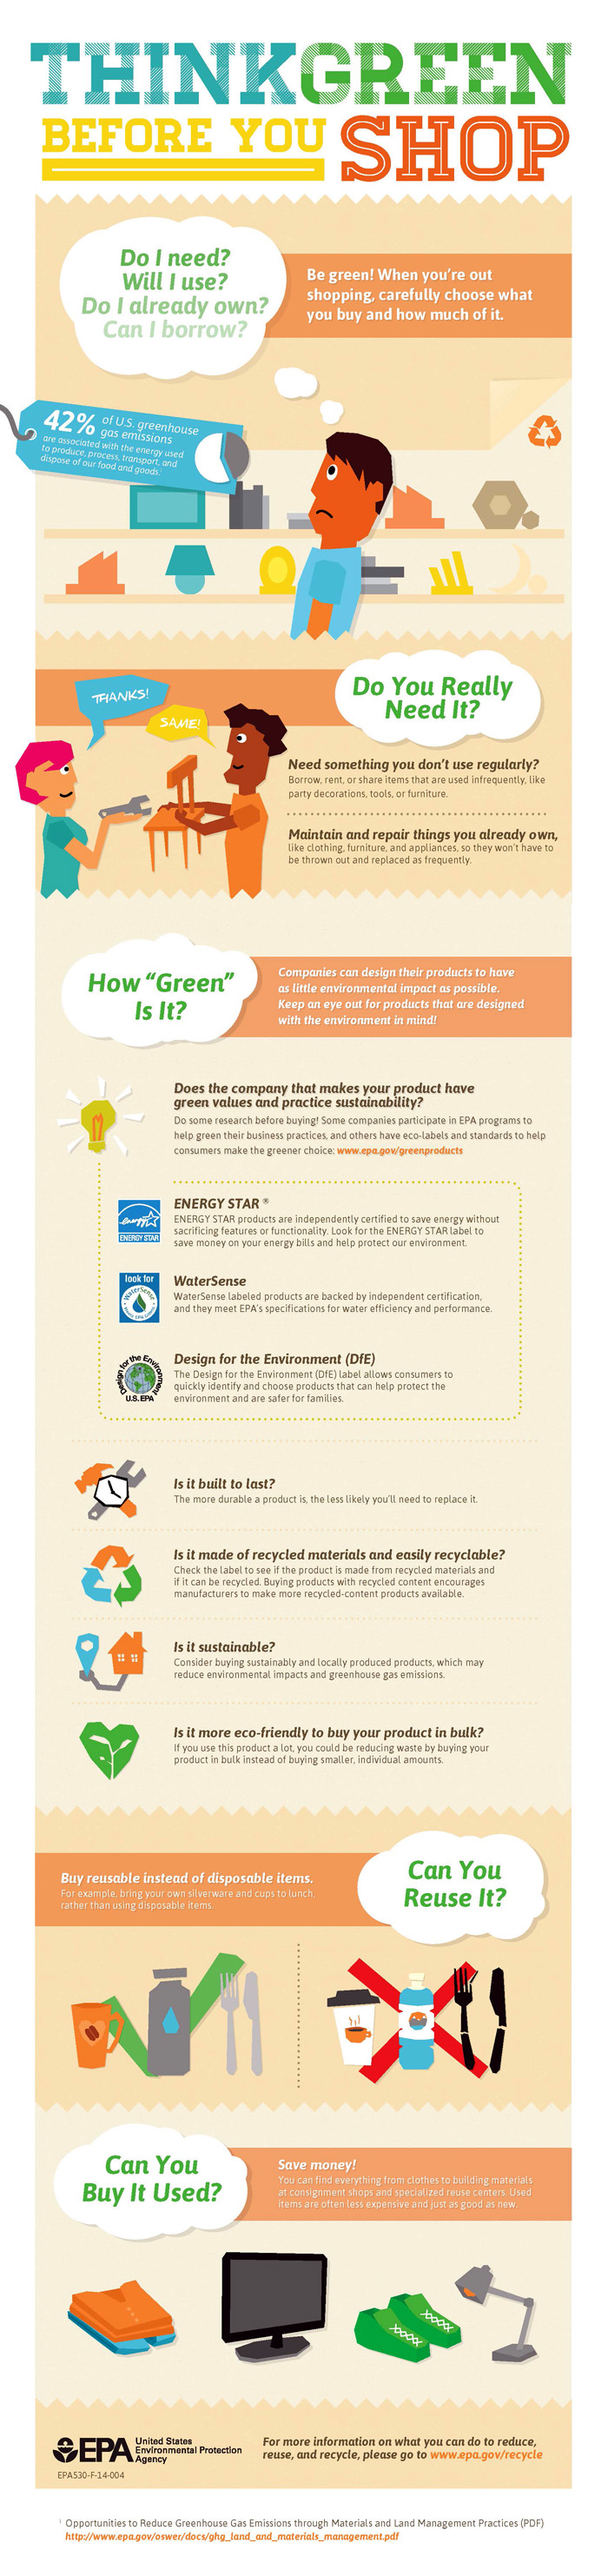 reduce, reuse, recycle infographic large jpg image